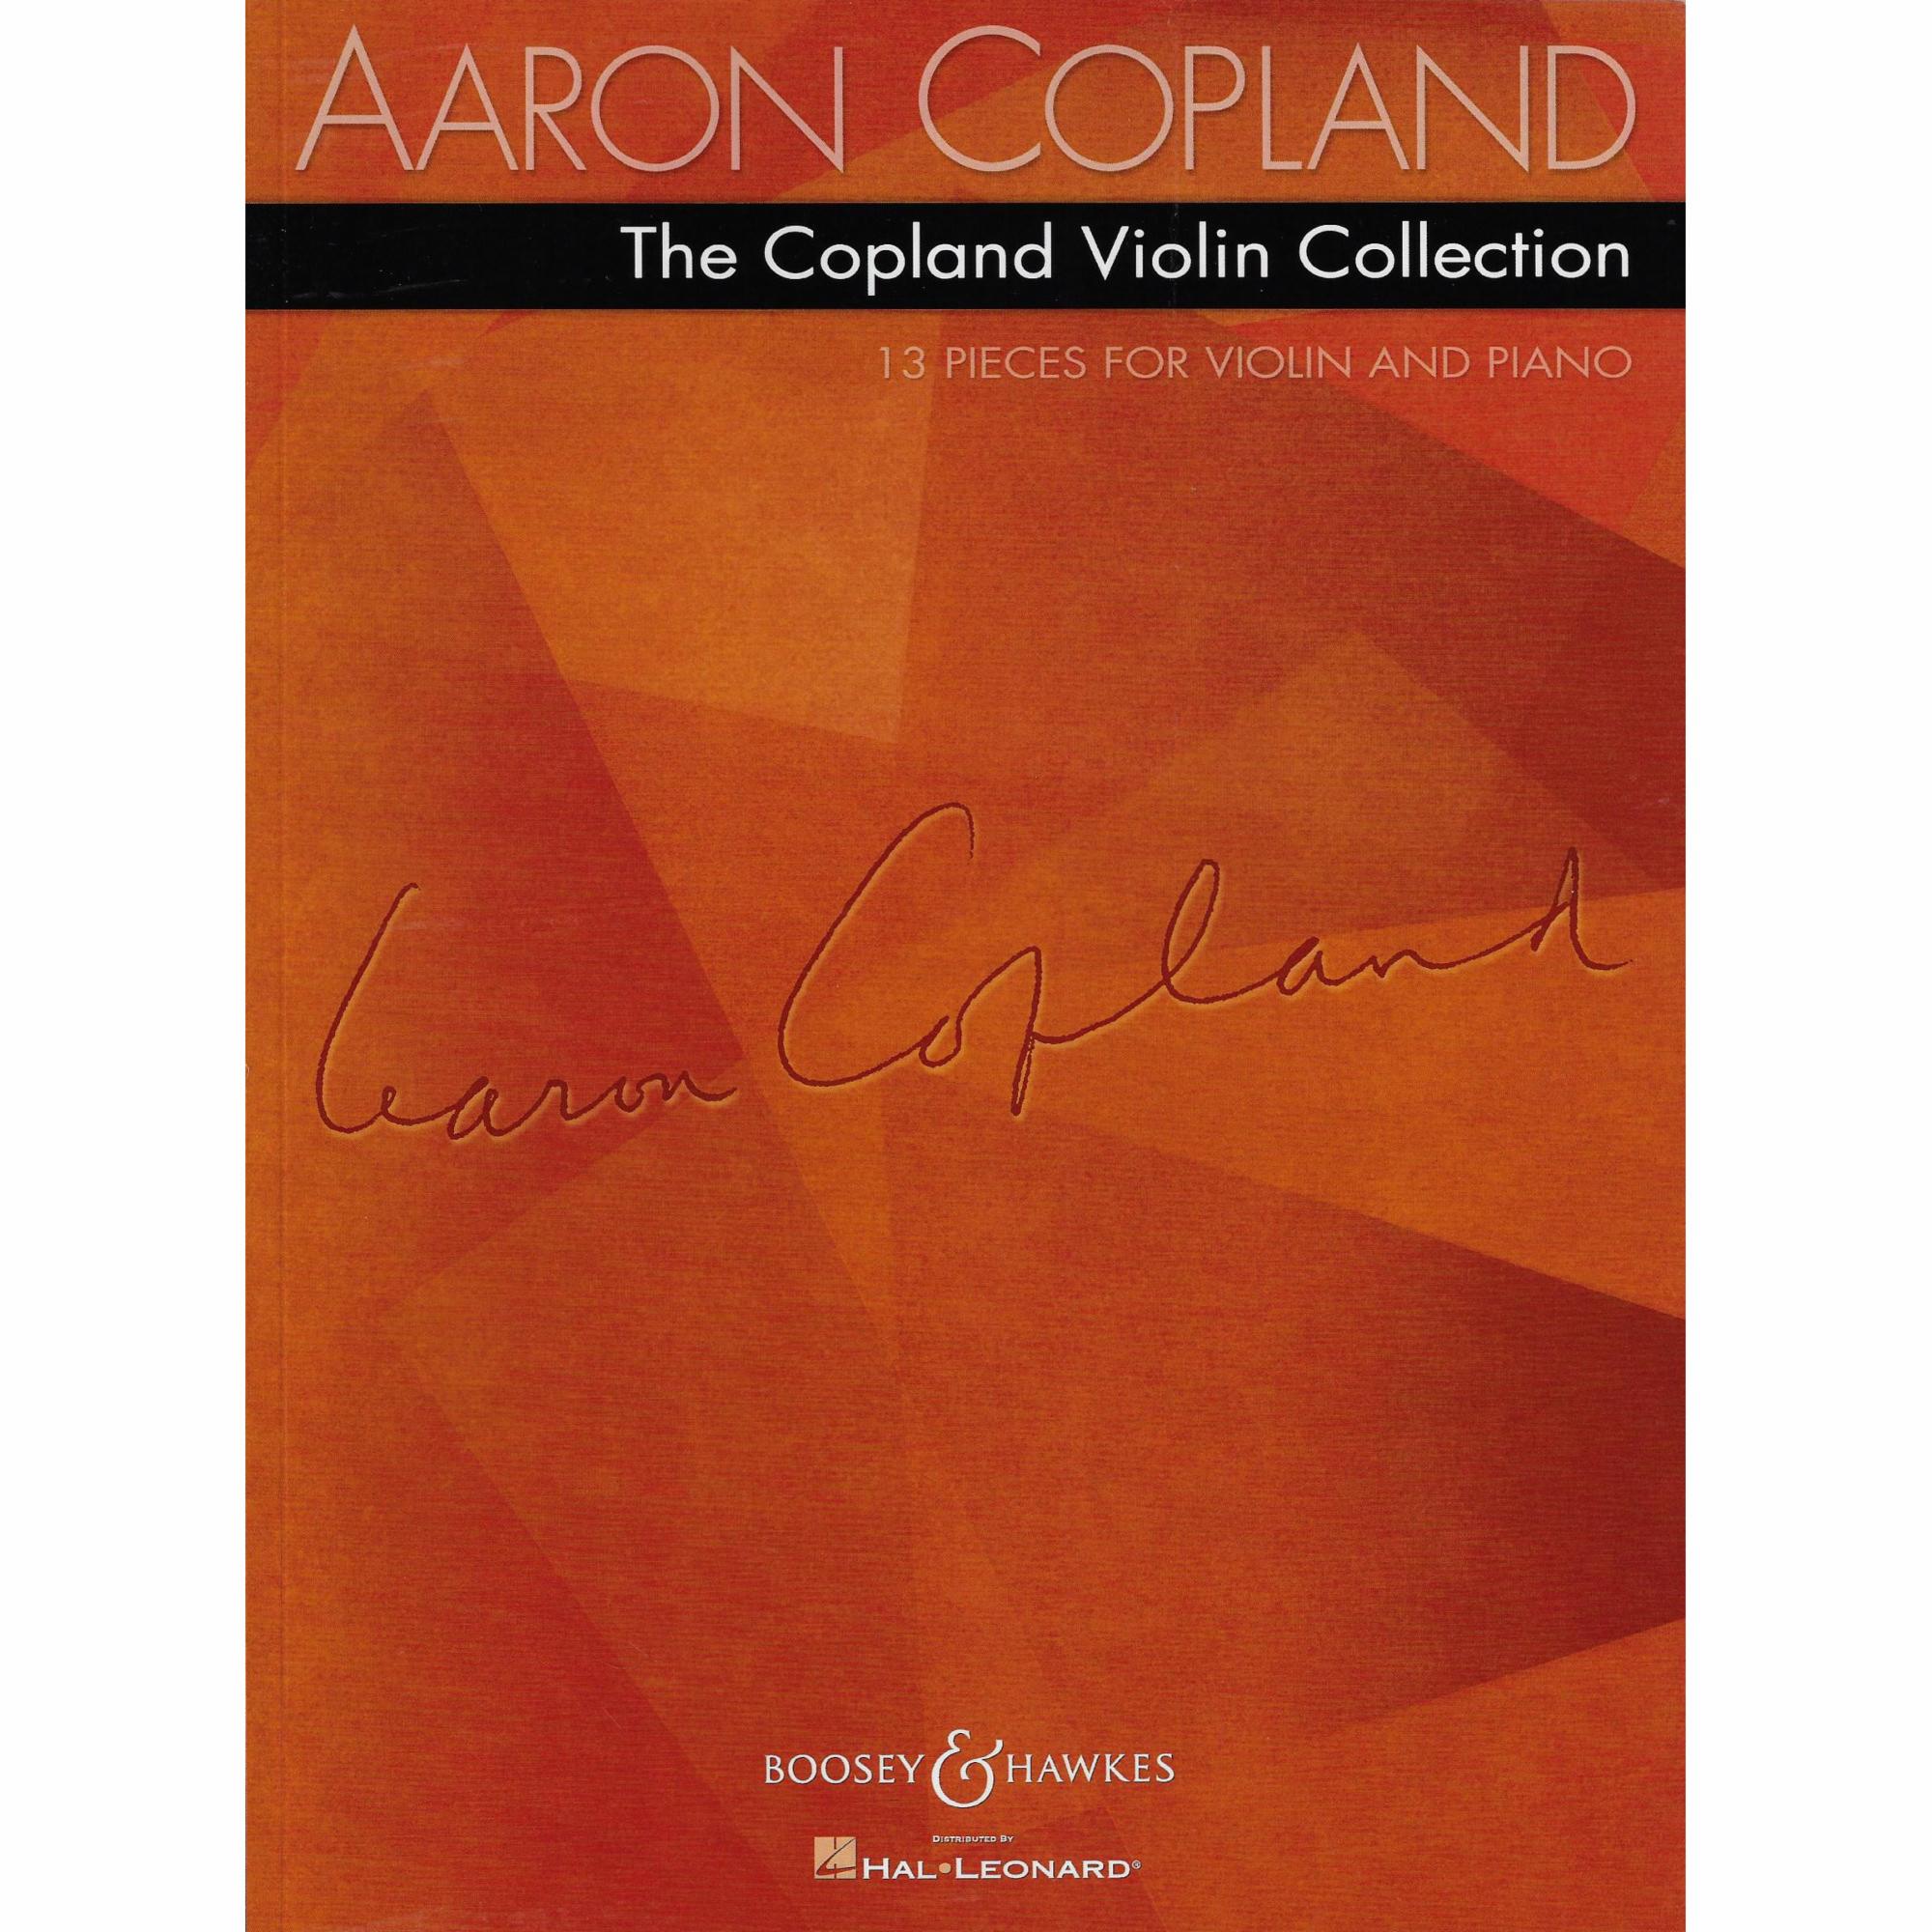 The Copland Violin Collection: 13 Pieces for Violin and Piano